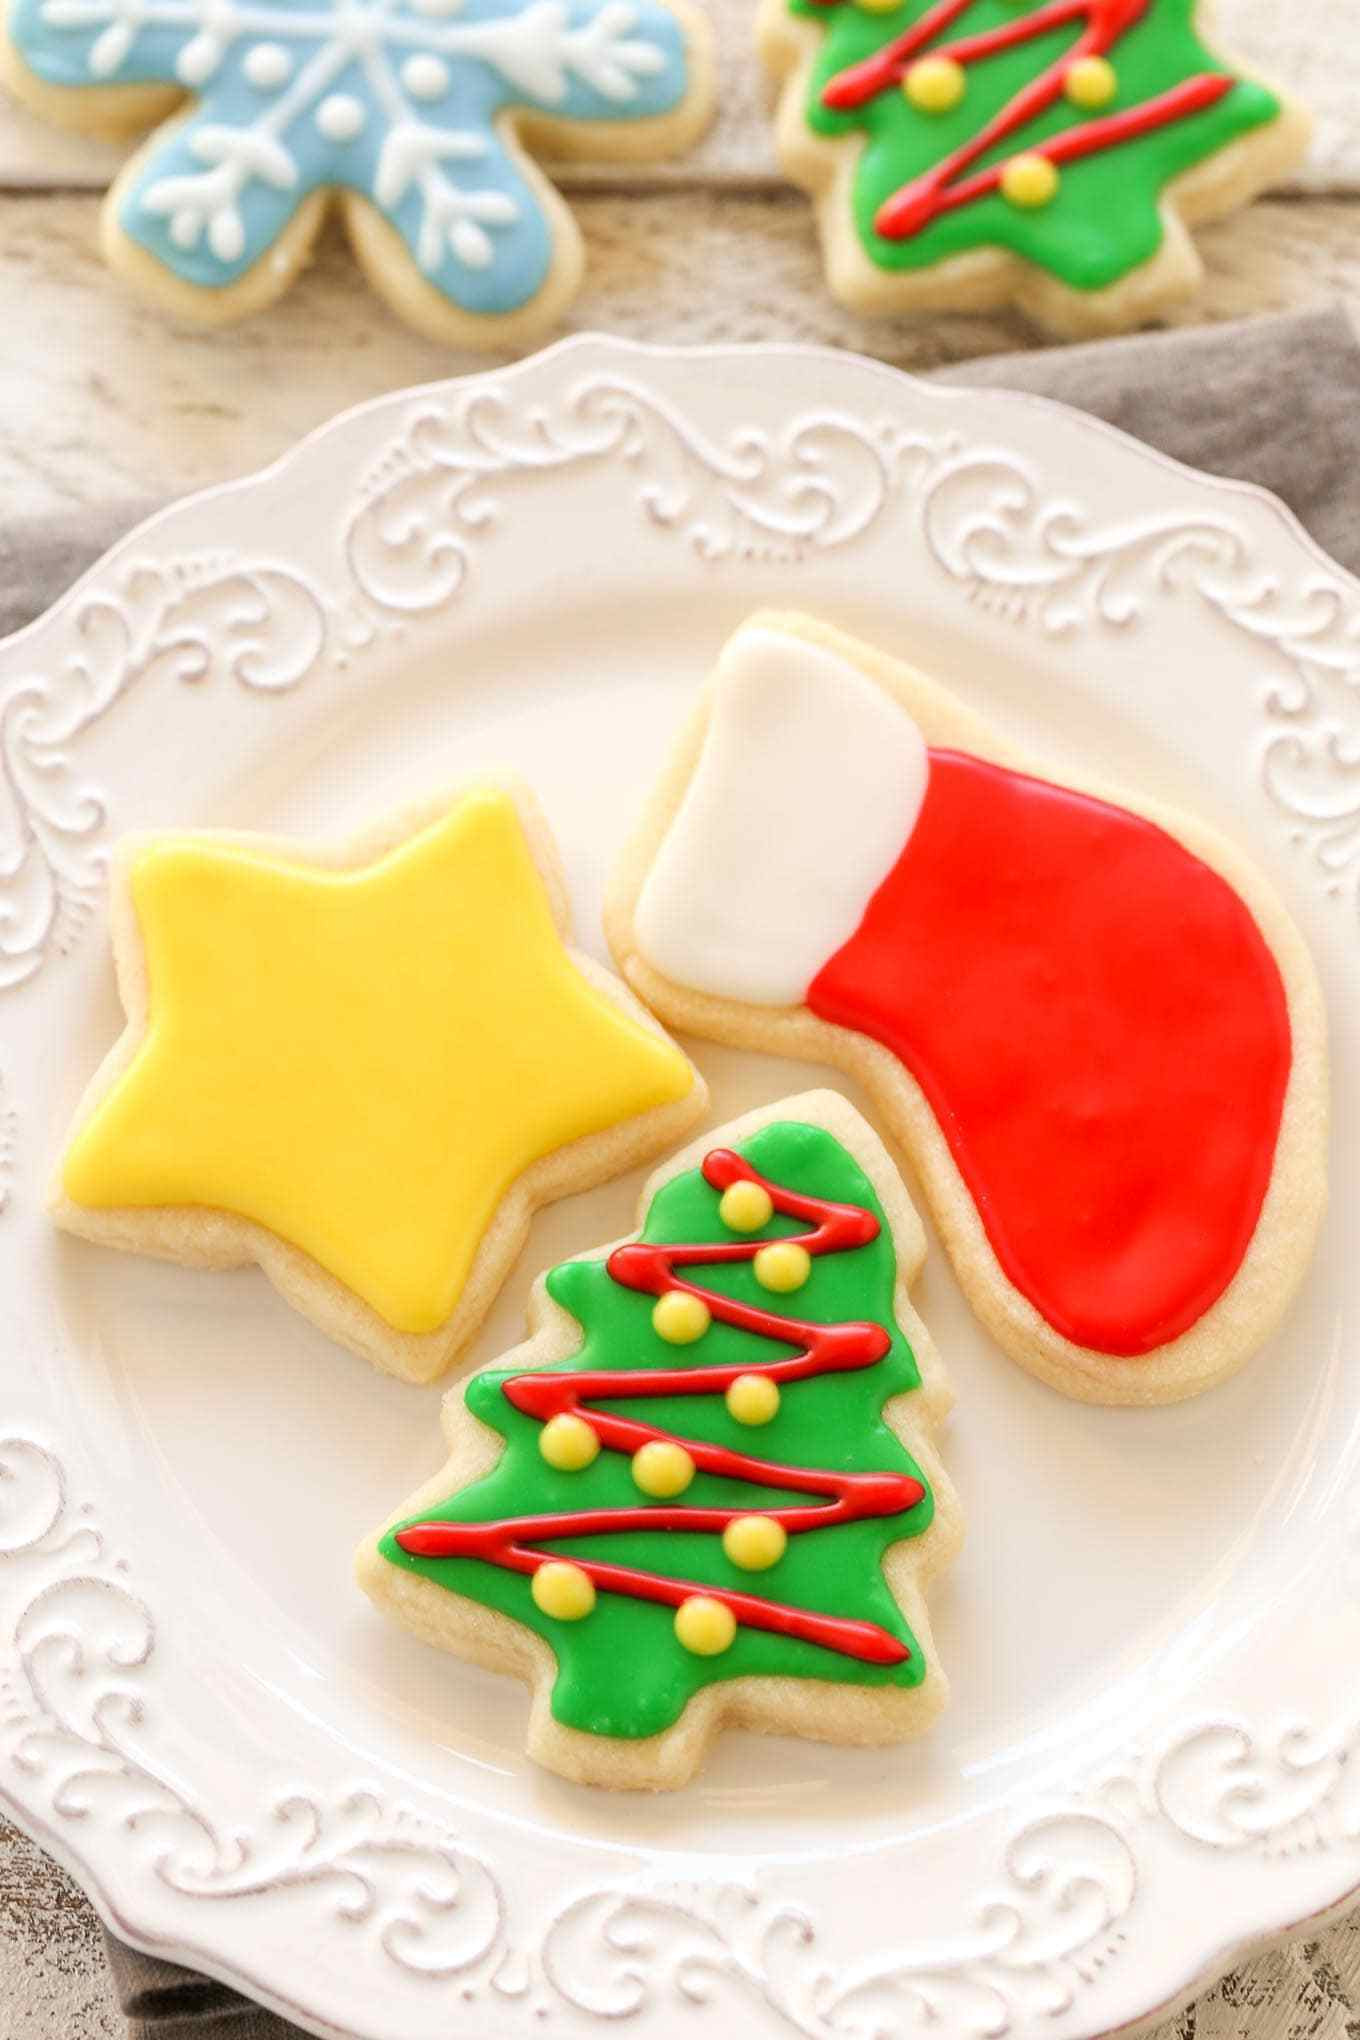 Easy Christmas Sugar Cookies Recipes
 Soft Christmas Cut Out Sugar Cookies Live Well Bake ten